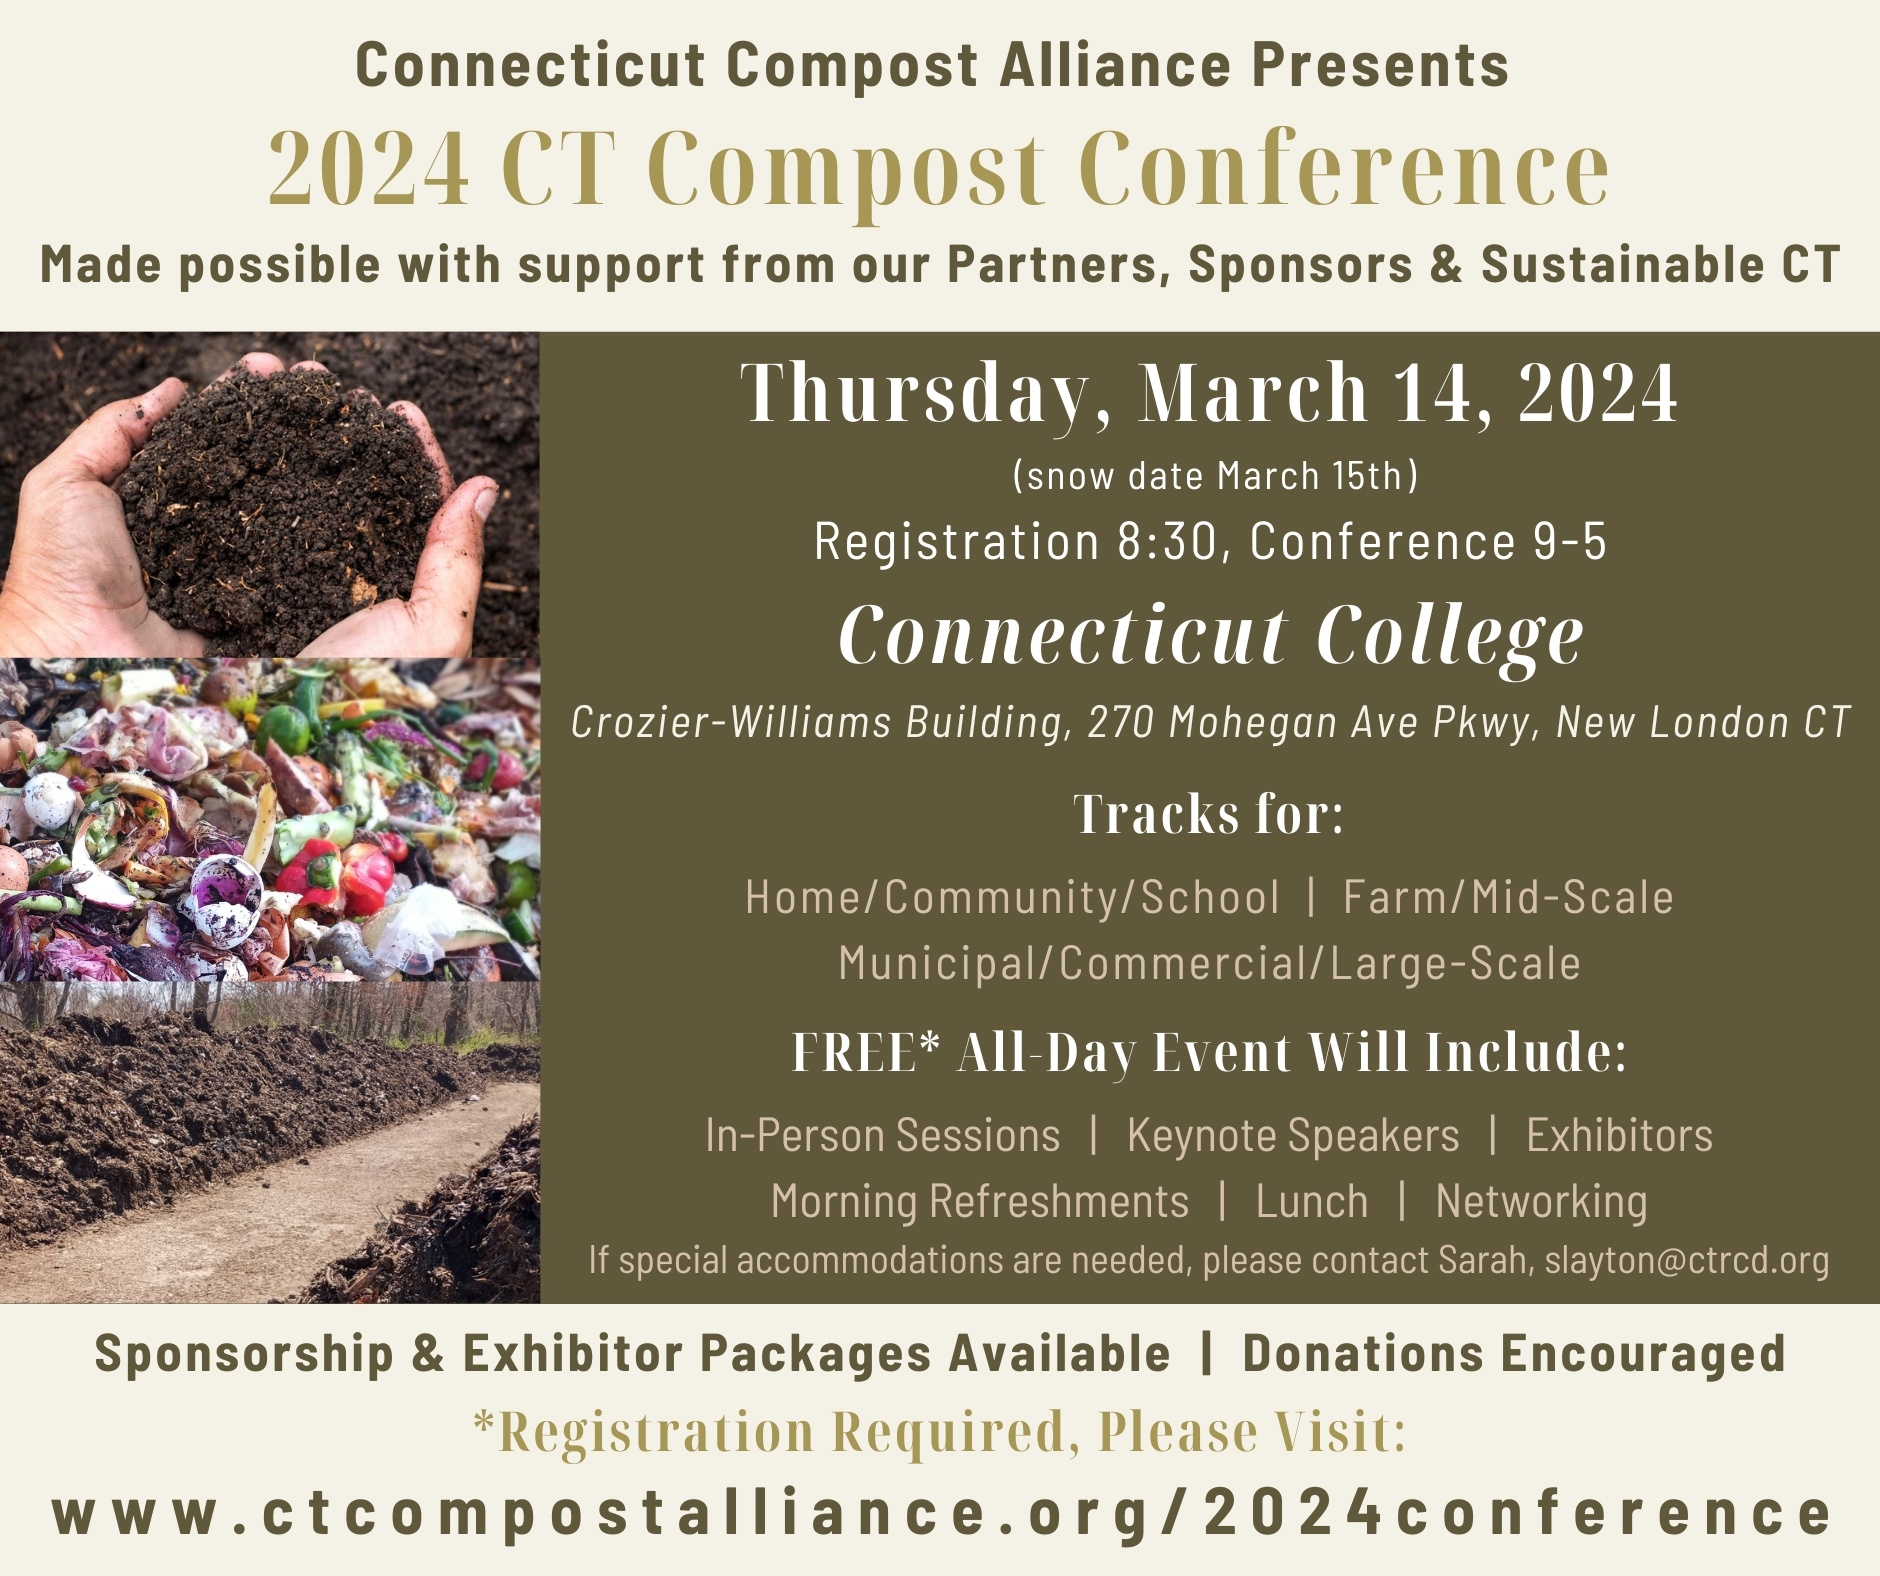 Join us on for the 2024 CT Compost Conference!

Thursday, March 14th, 2024

Registration 8:30am, Conference 9am-5pm

Connecticut College

Crozier-Williams Building, 270 Mohegan Ave Pkwy, New London, Ct

Registration is required. To register, go to: https://www.ctcompostalliance.org/2024conference

Donations can be made via Patronicity: https://www.patronicity.com/project/2024_ct_compost_conference#!/